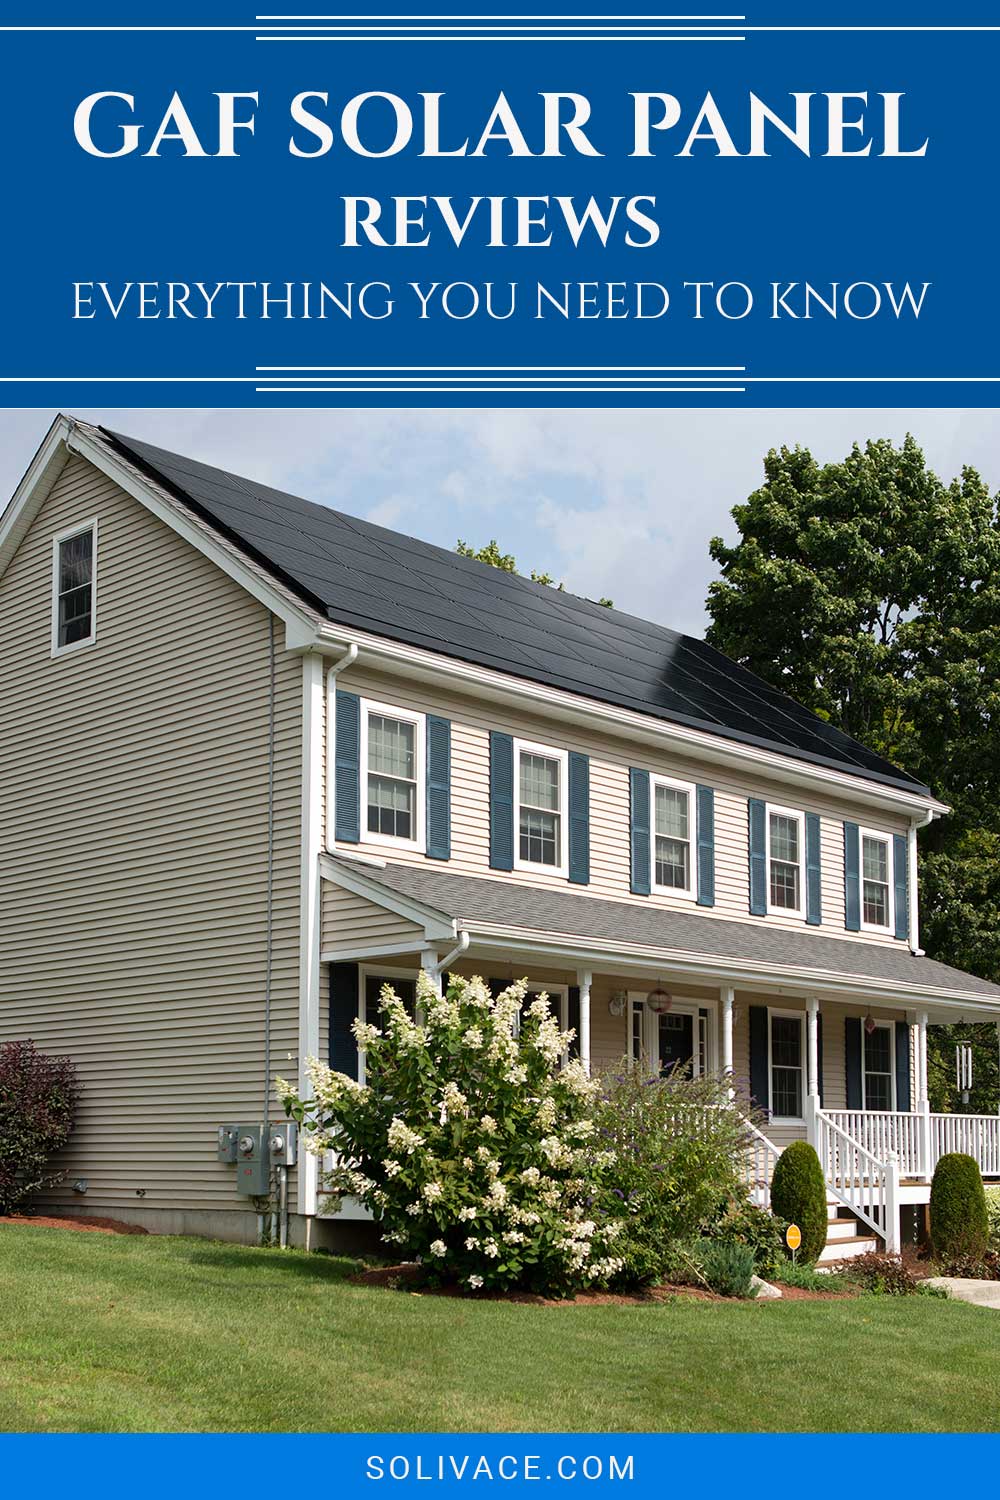 GAF Solar Panel Reviews – Everything You Need To Know